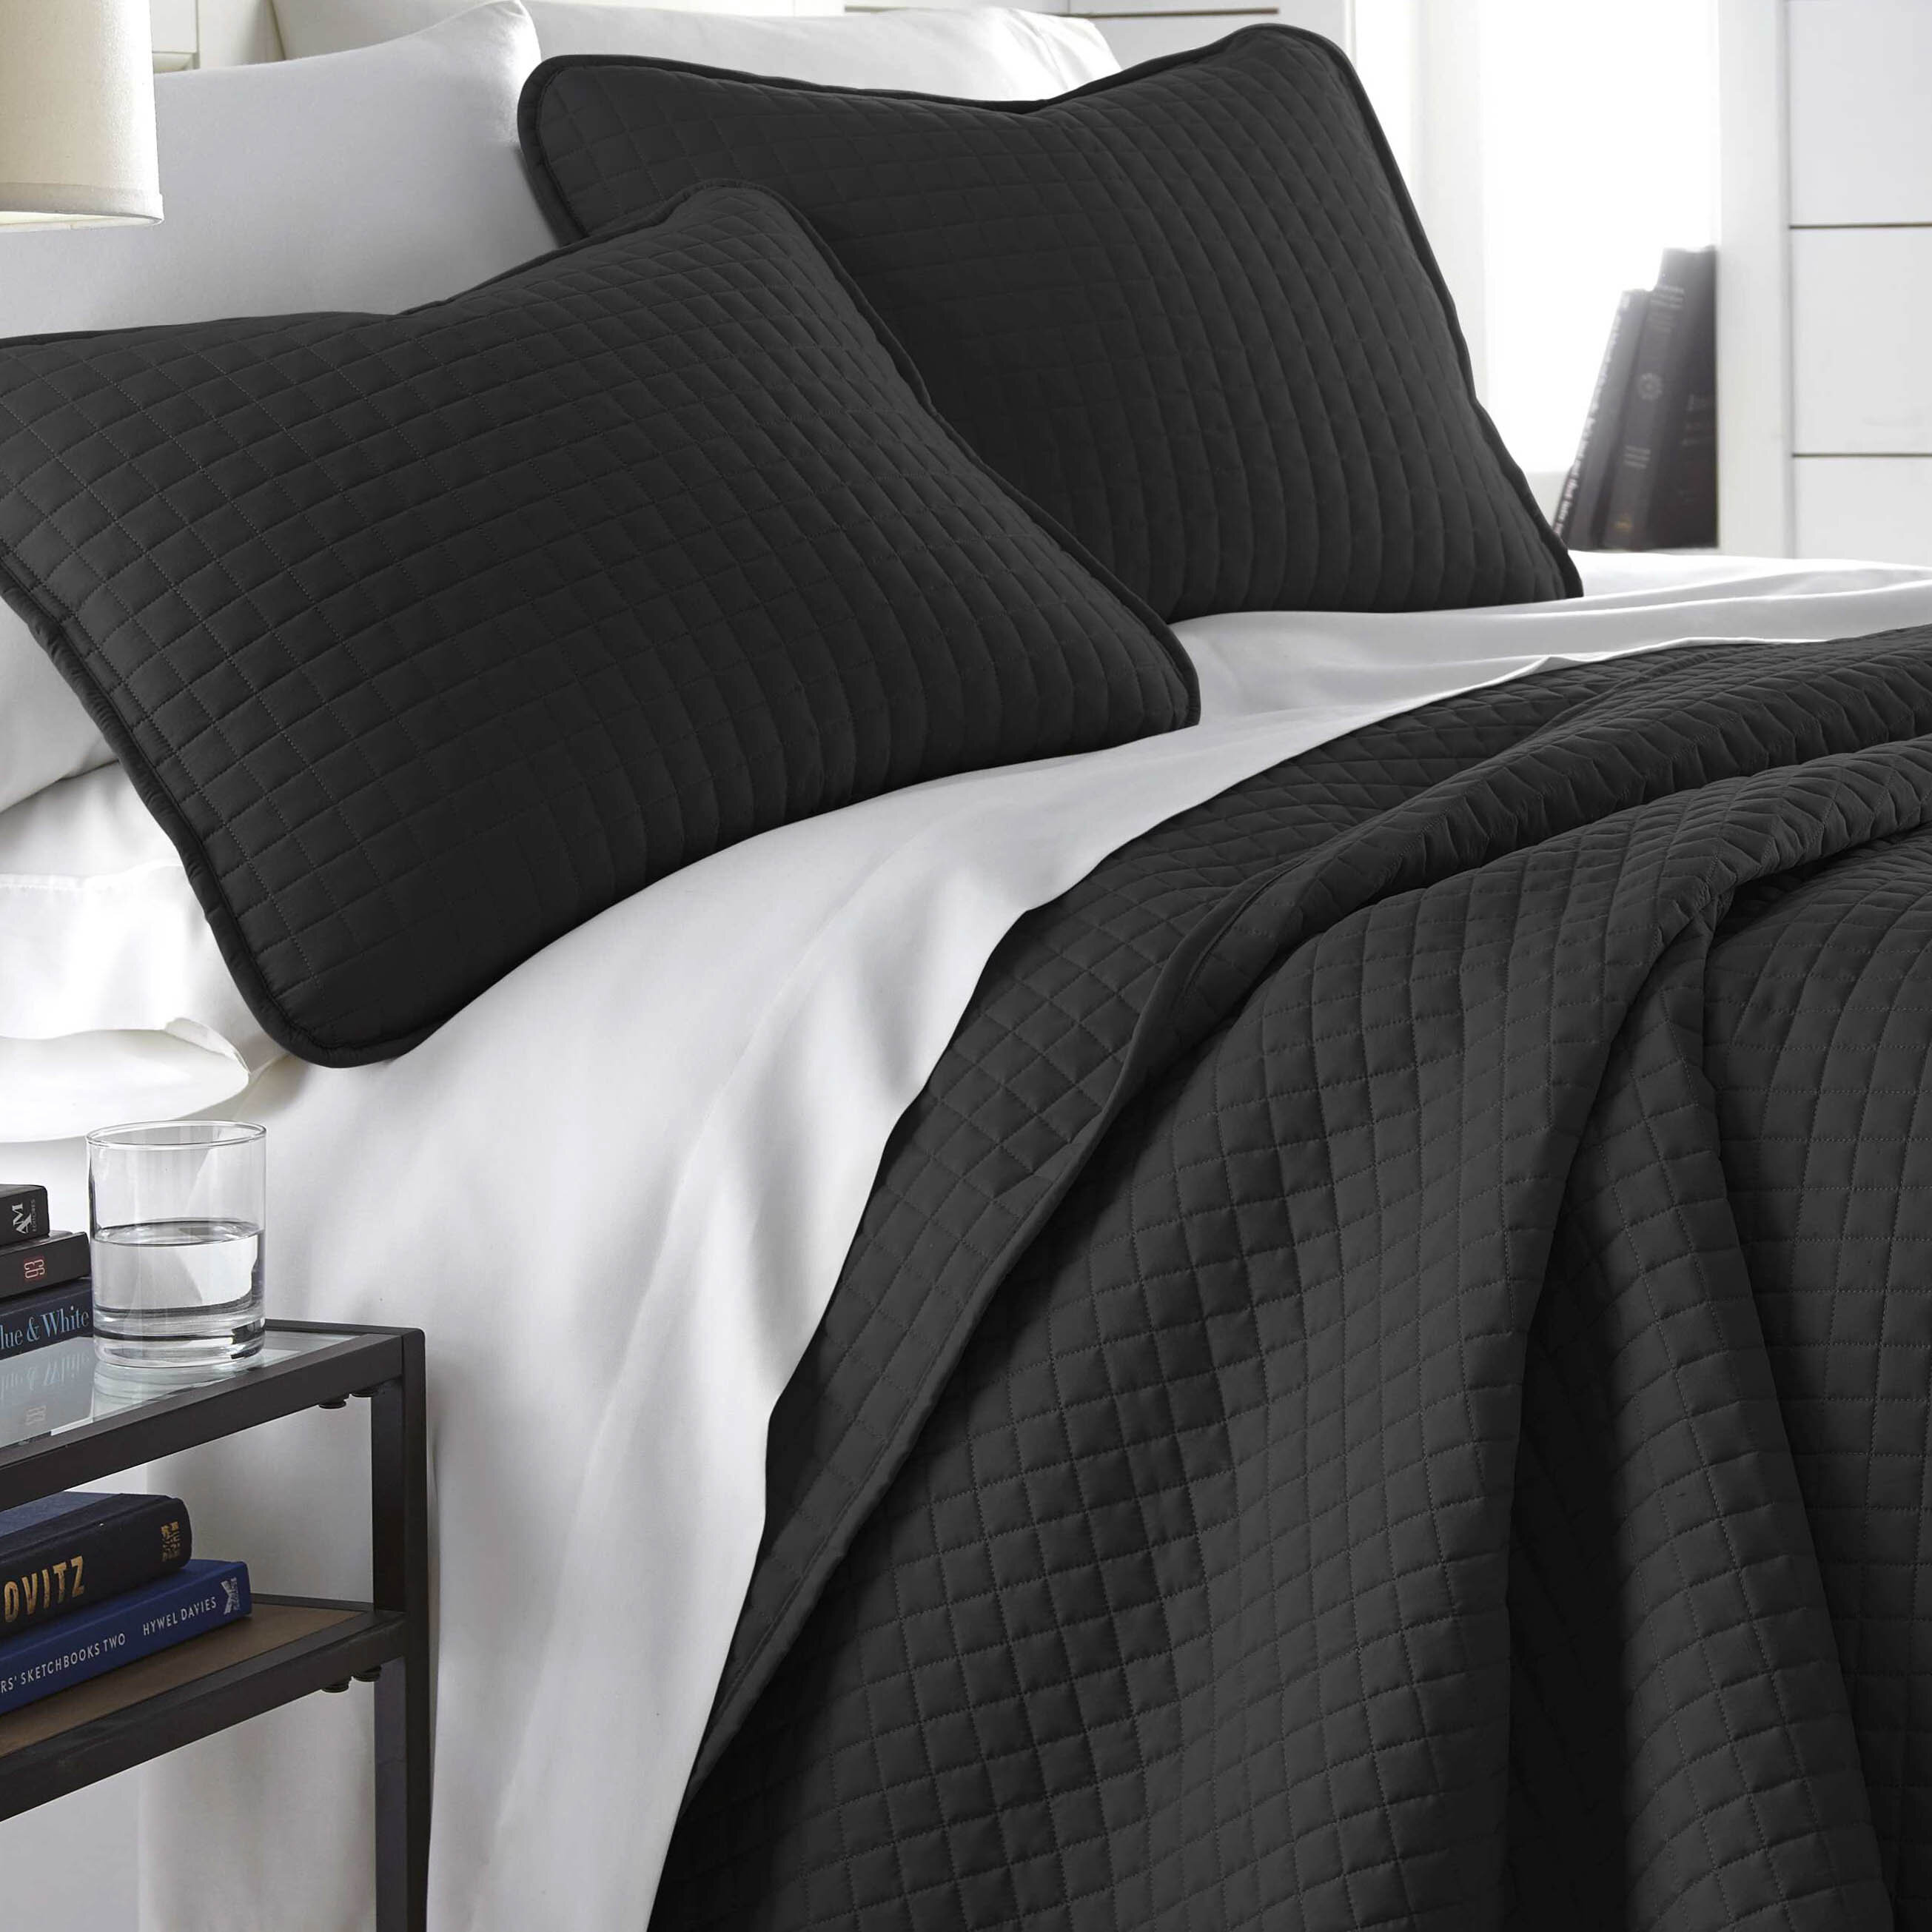 Black Quilts Coverlets Sets Free Shipping Over 35 Wayfair